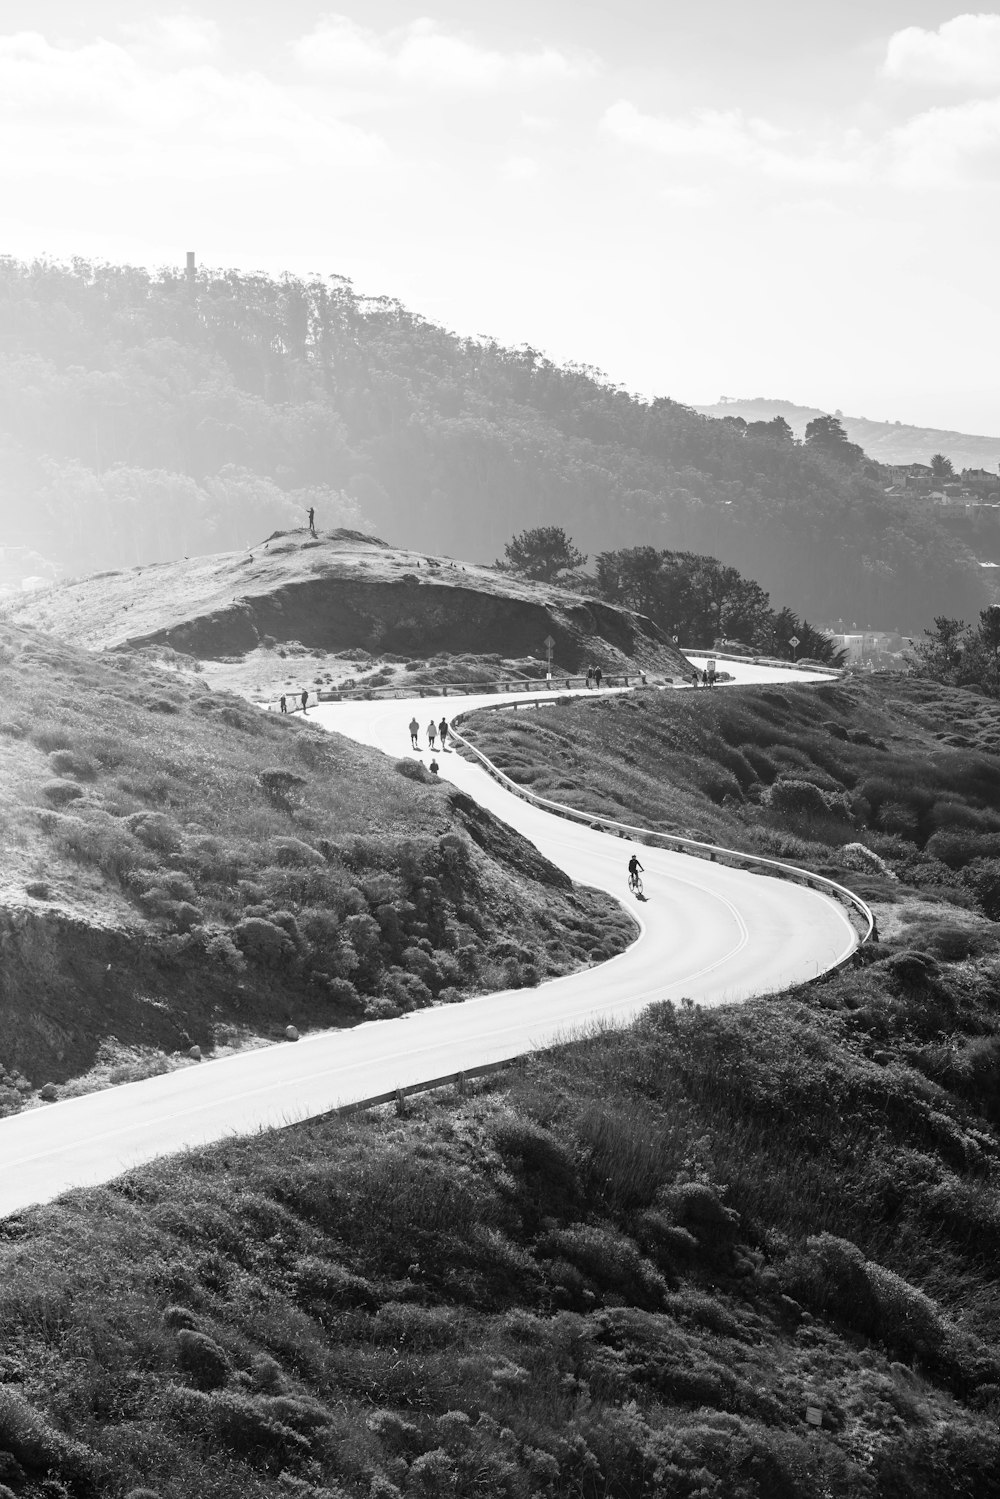 a group of people riding bikes down a winding road